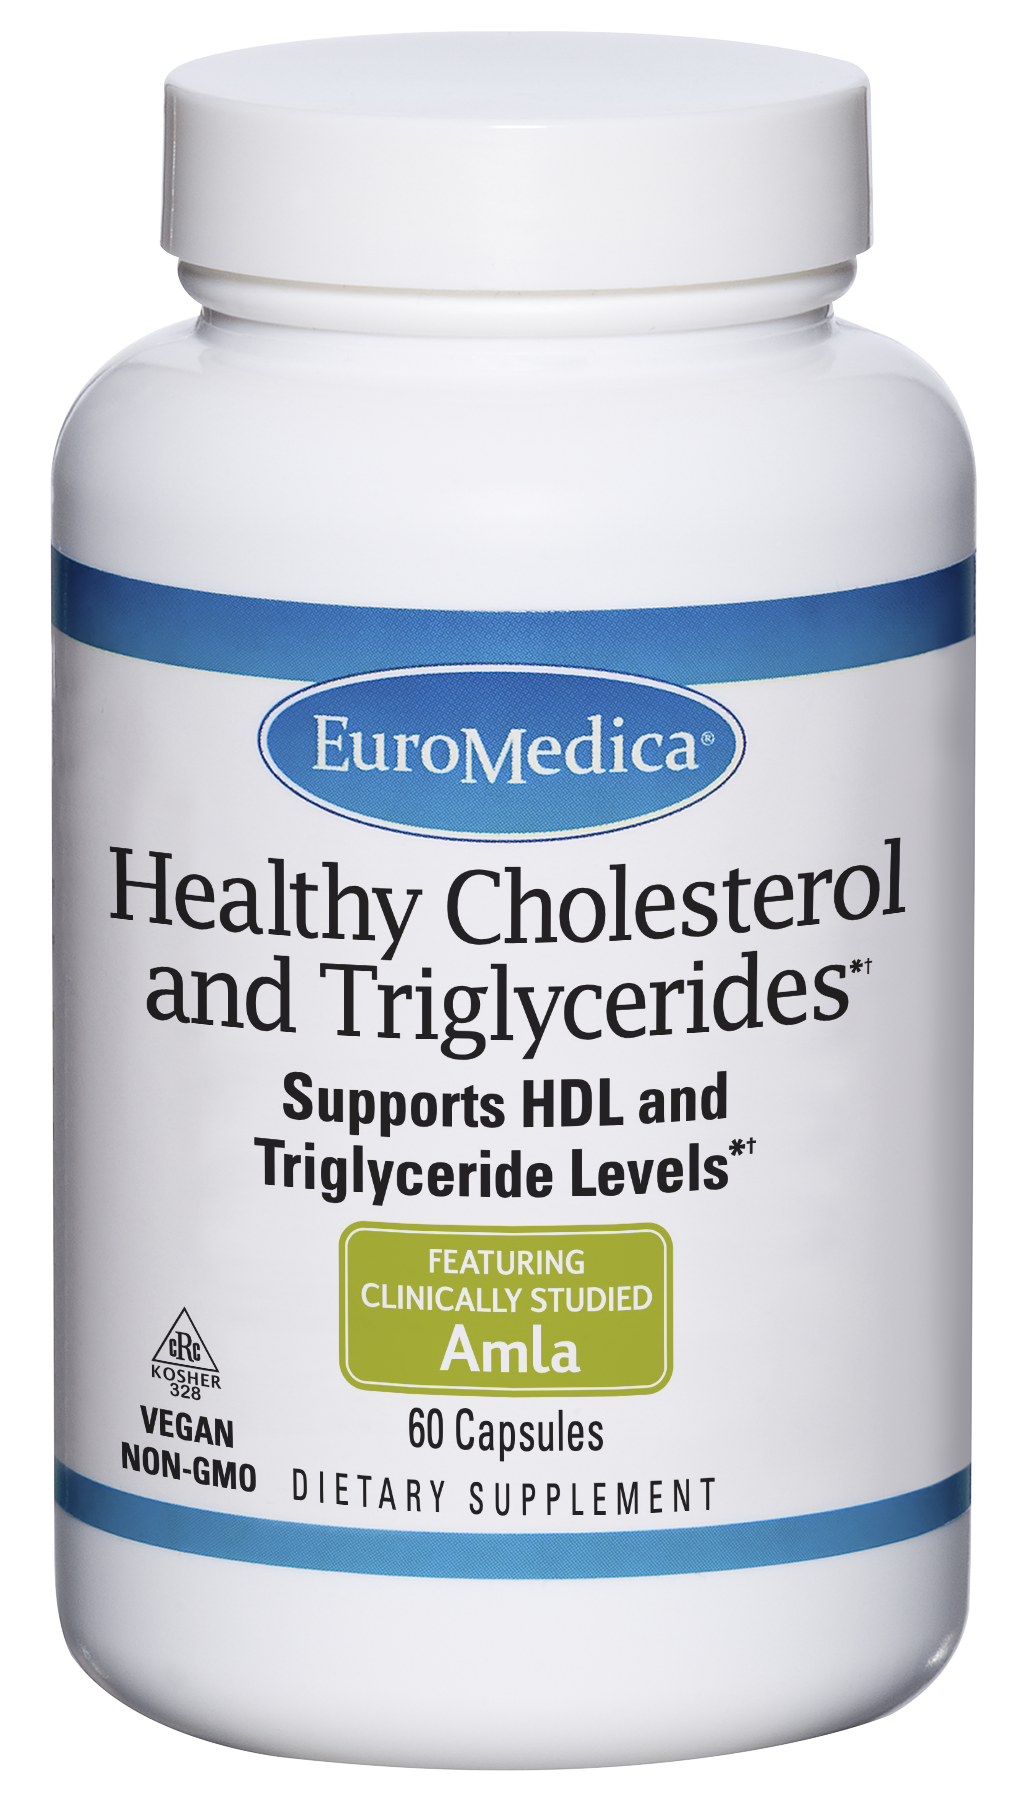 Healthy Cholesterol and Triglycerides